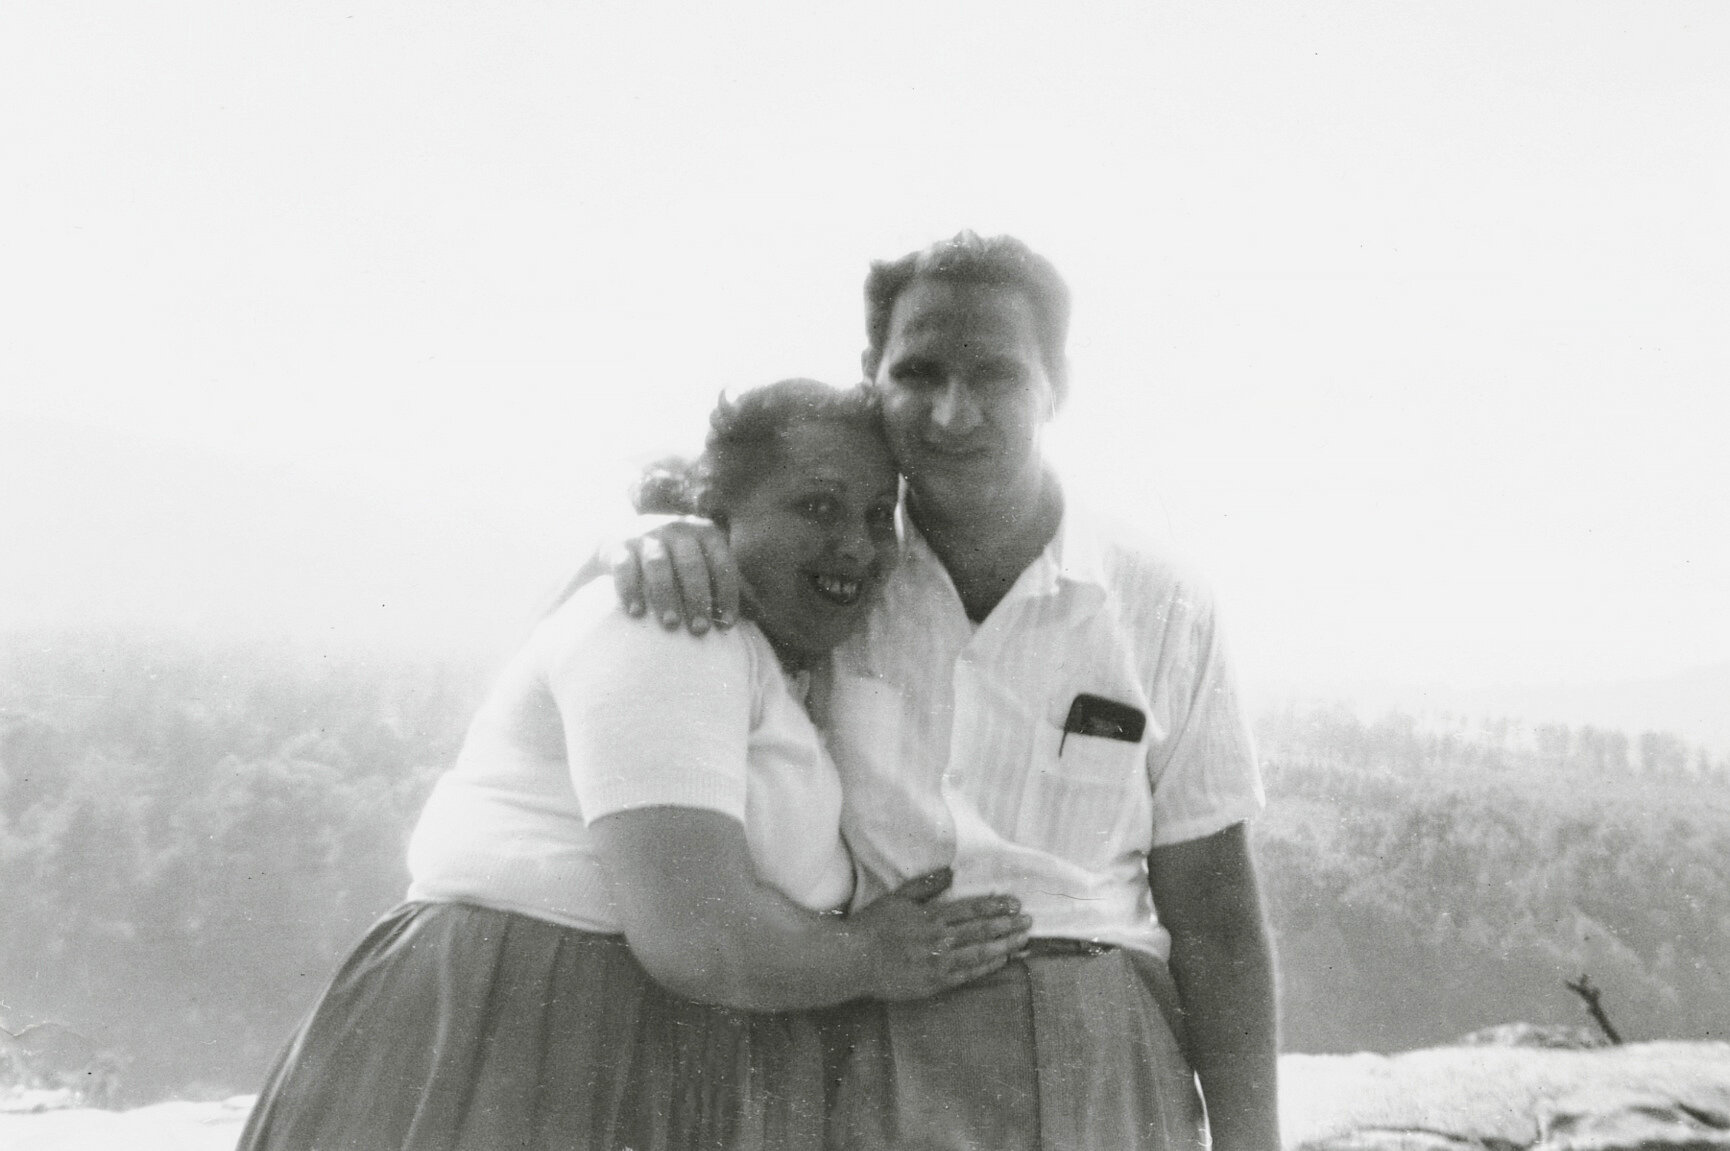  My first photograph:  My Parents, July, 1951 